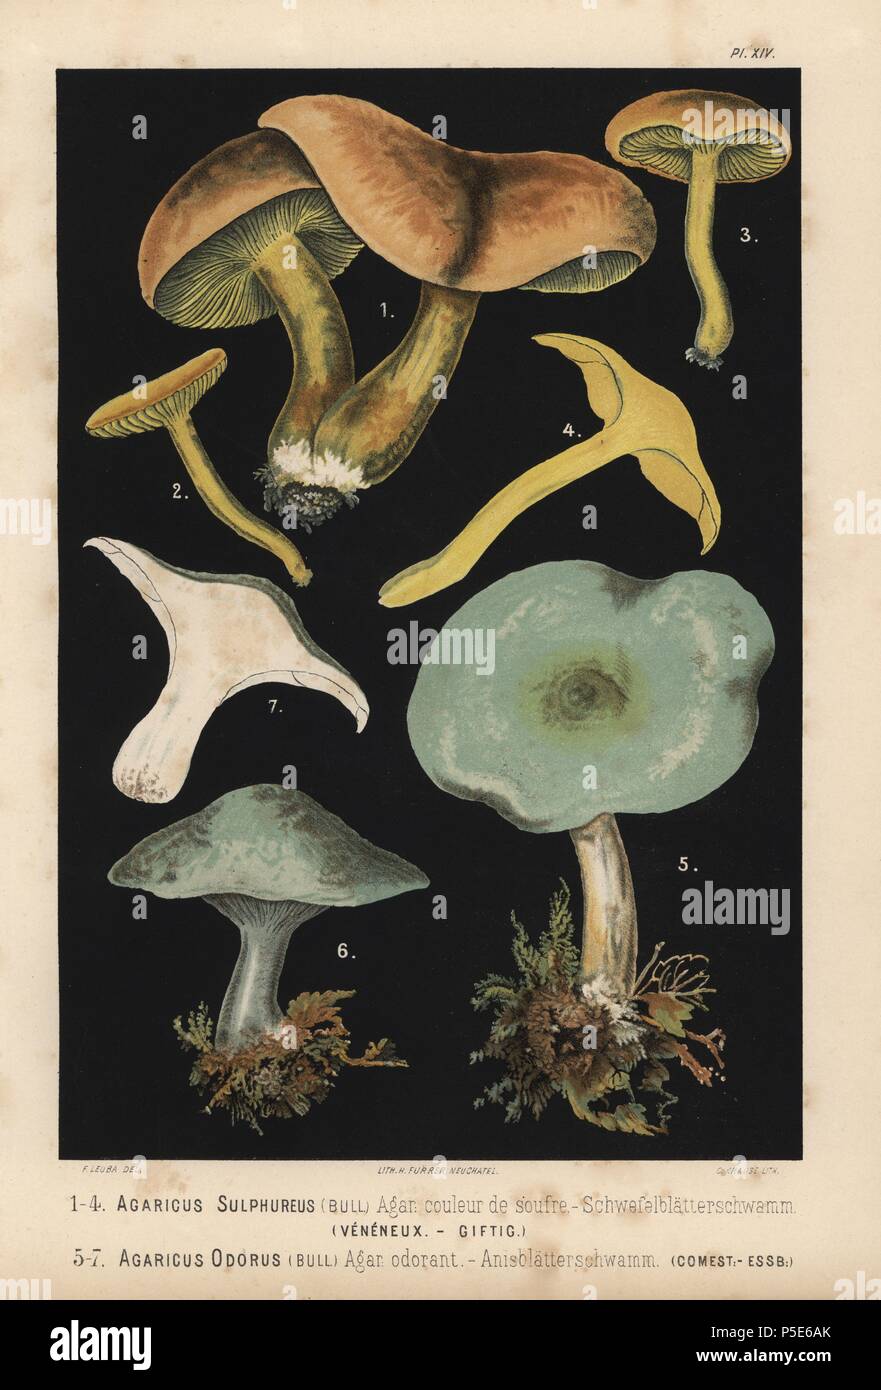 Sulphur knight or gas agaric, Tricholoma sulphureum, Agaricus sulphureus, and Aniseed toadstool, Clitocybe odora, Agaricus odorus. Chromolithograph by C. Krause of an illustration by Fritz Leuba from 'Les champignons comestibles et les especes vénéneuses avec lesquelles ils pourraient etre confondus' (Edible mushrooms and the poisonous species they should not be confused with), Delachaux et Niestle, Neuchatel, Switzerland, 1890, lithographed by H. Furrer. Fritz Leuba (1848-1910) was a mycologist and artist from Neuchatel, Switzerland. Stock Photo